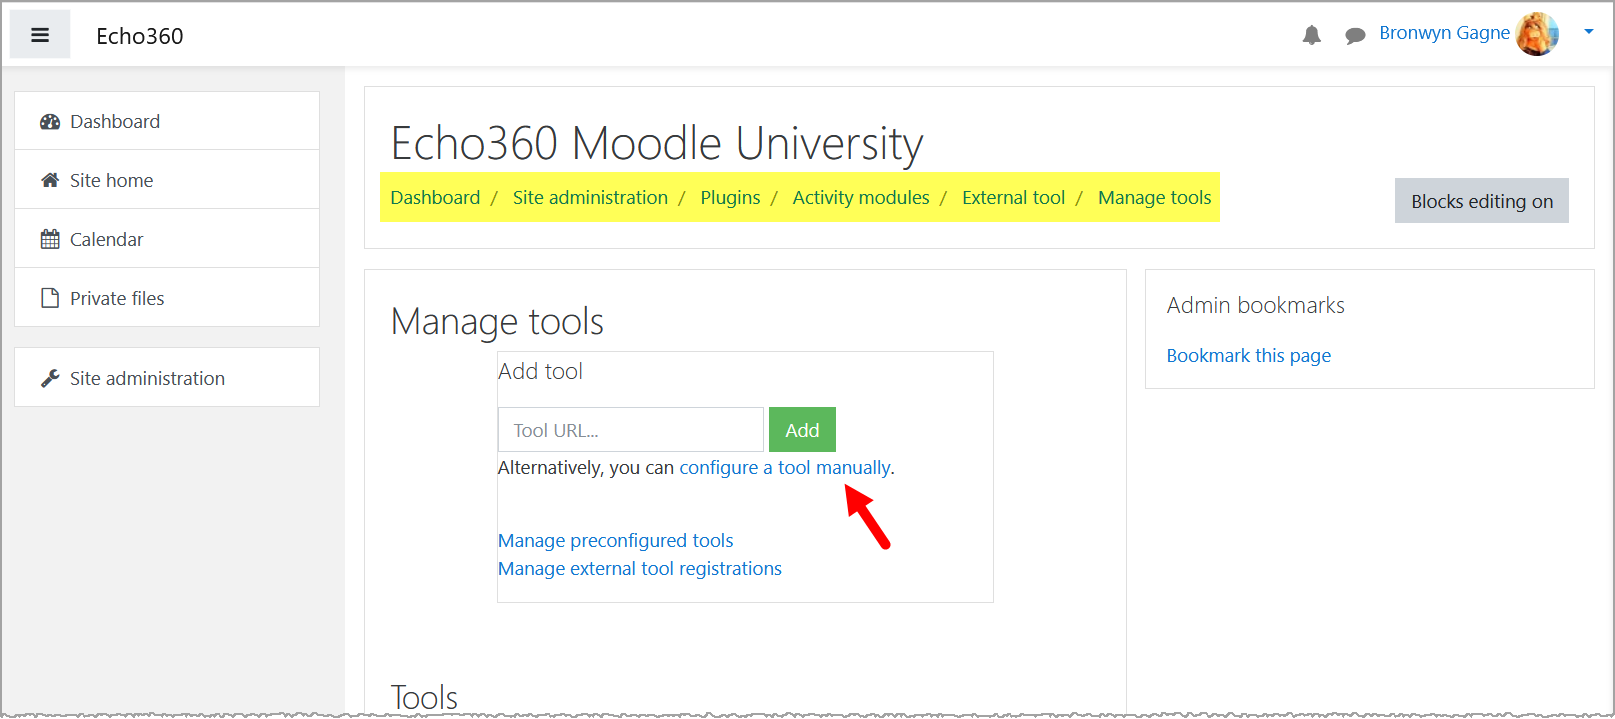 Moodle Manage Tools page with navigation breadcrumbs and Configure tool manually link identified for steps as described